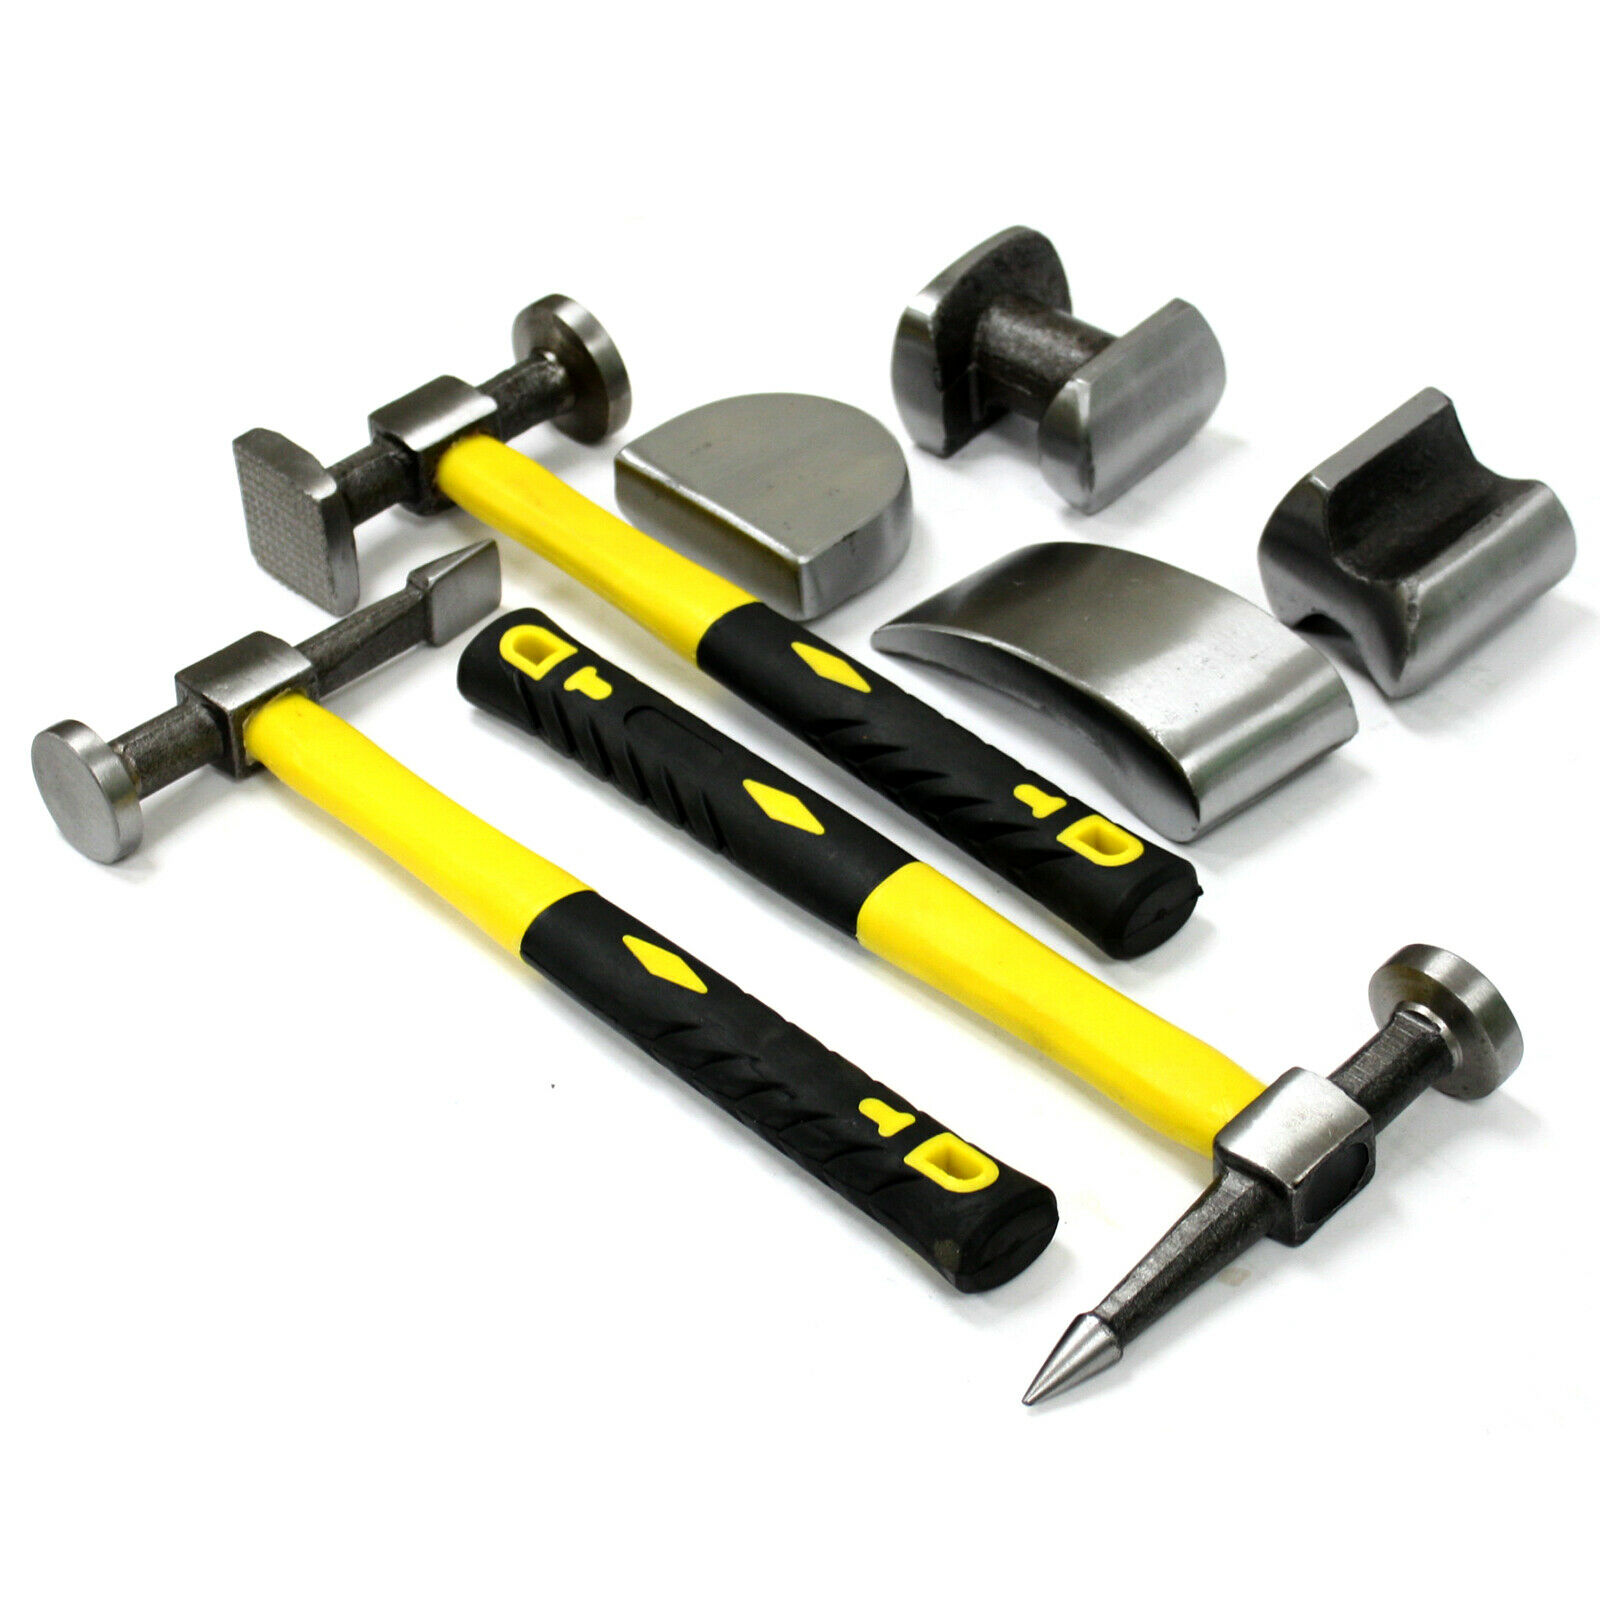 Heavy Duty Auto Body Comprehensive Hammers And Dolly Set Repair Kits 7 Pieces 